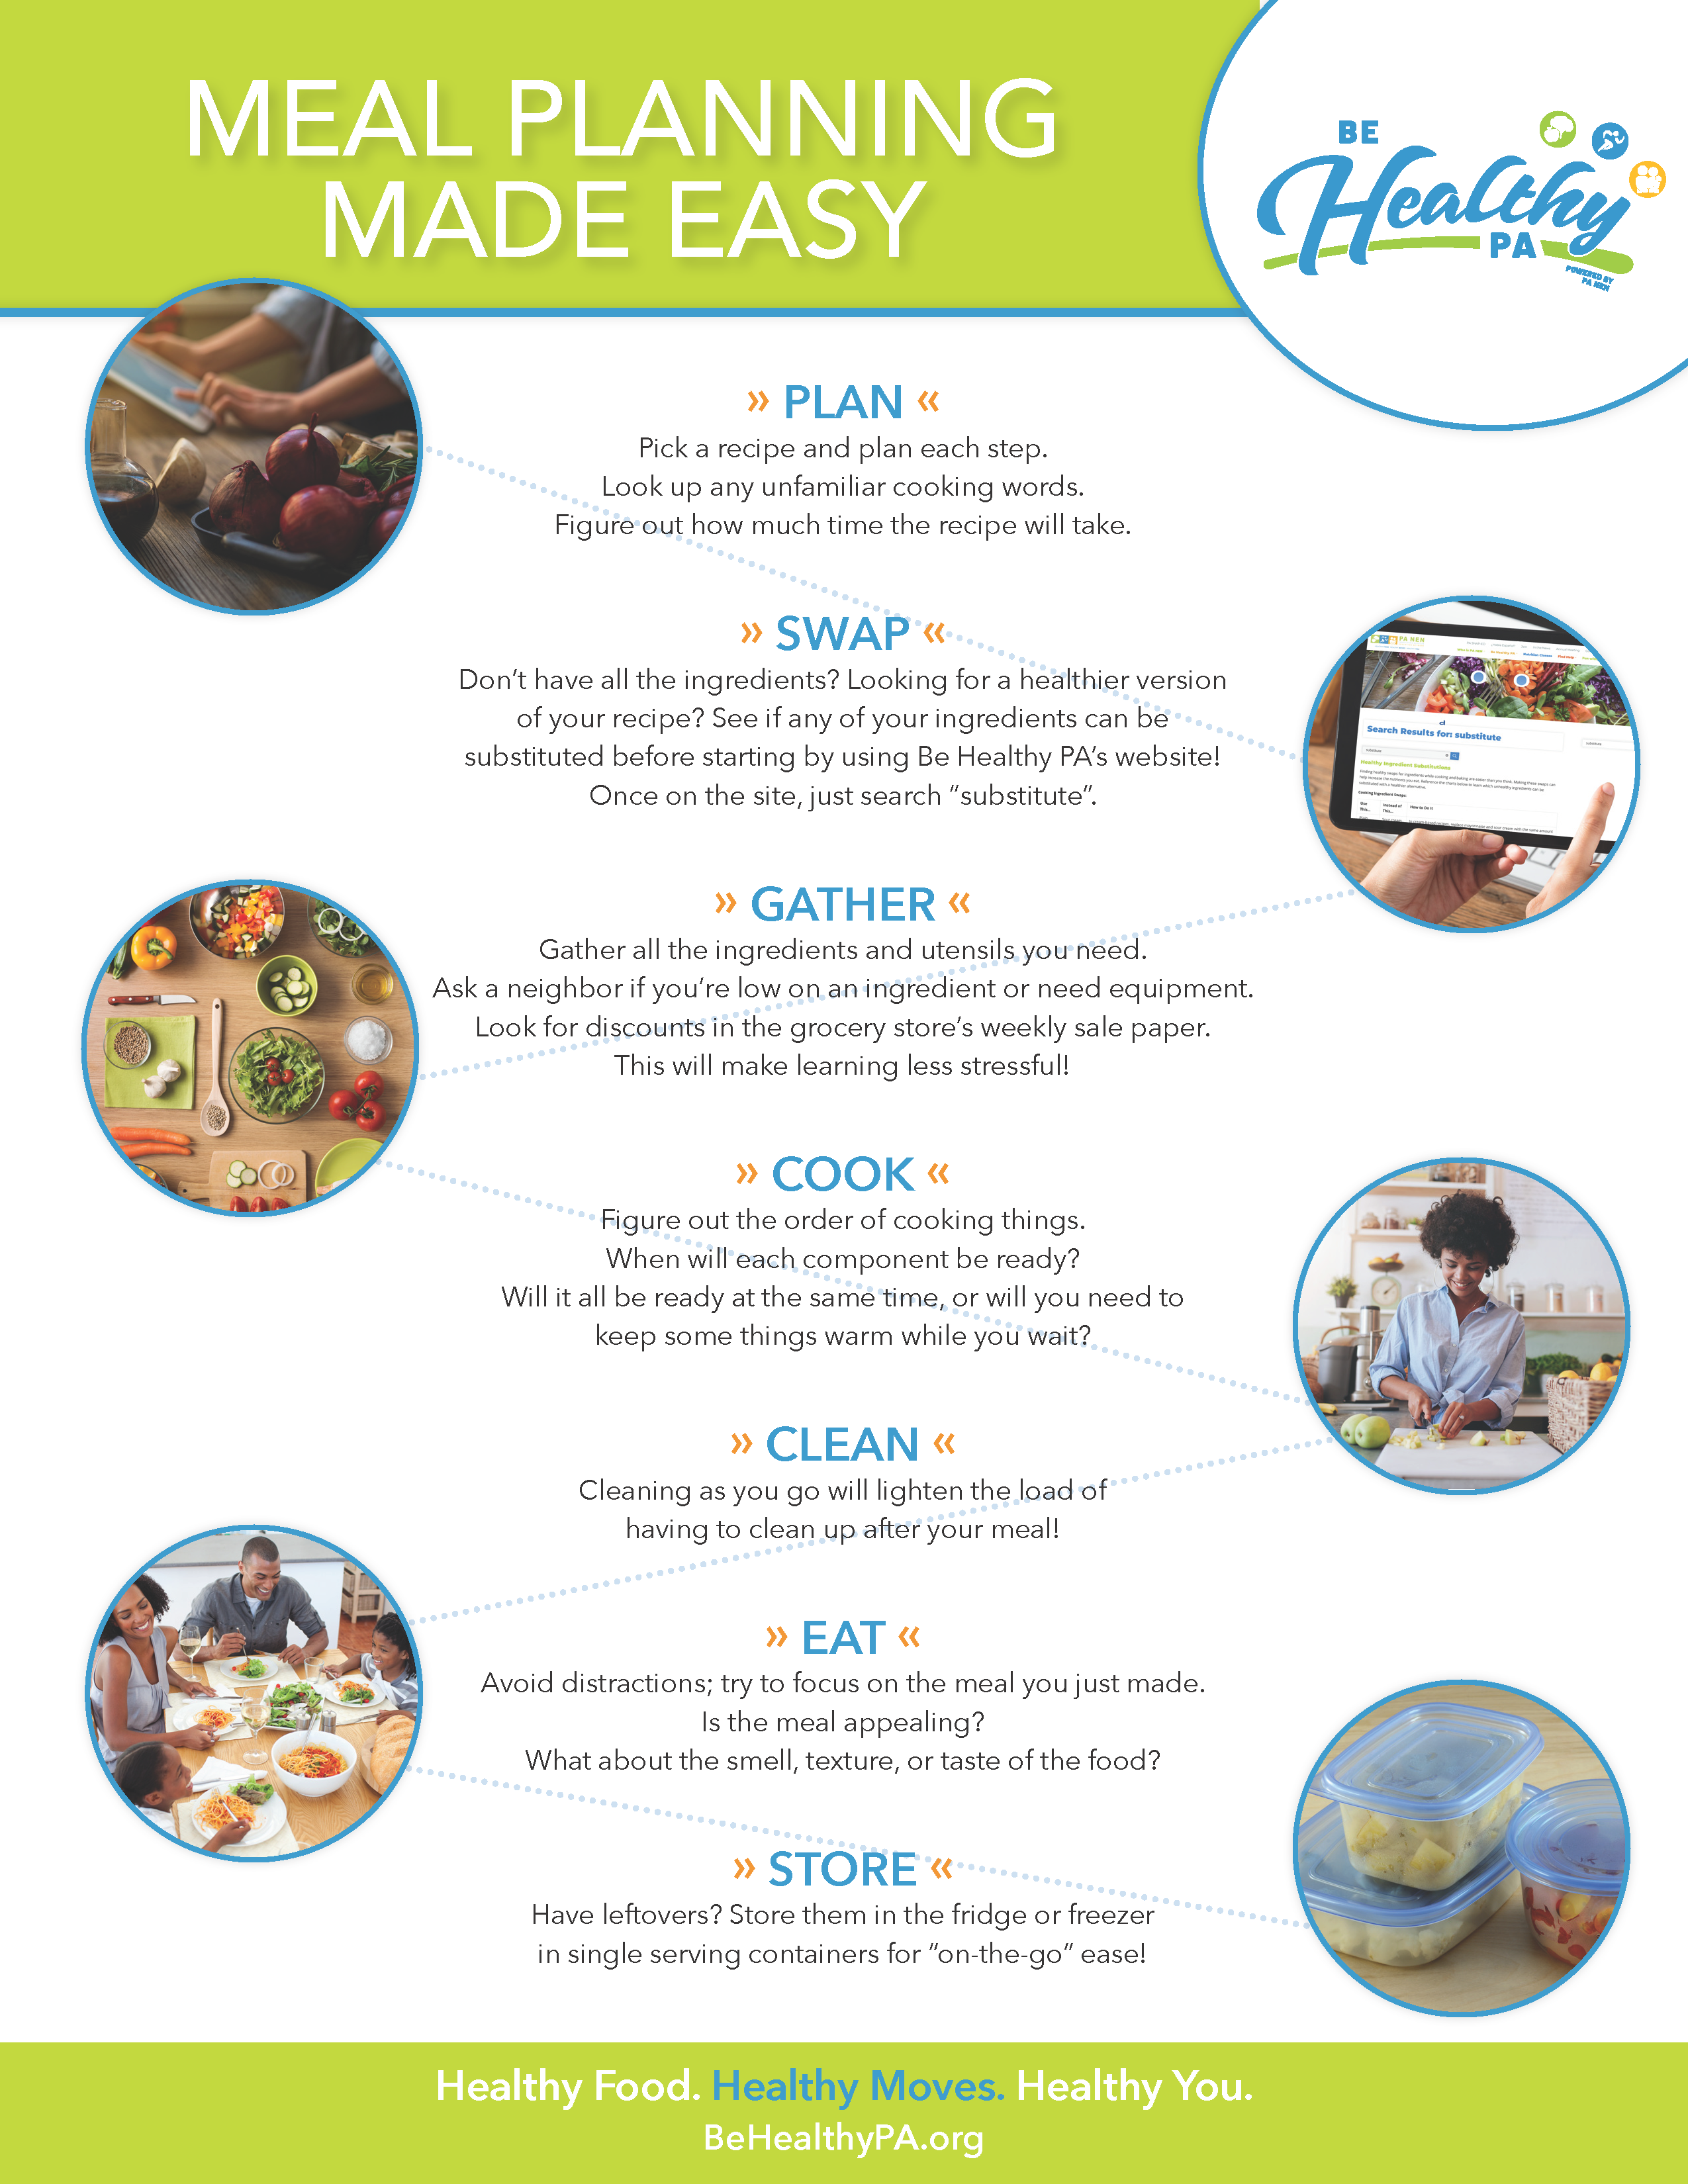 Inexpensive meal planning guides